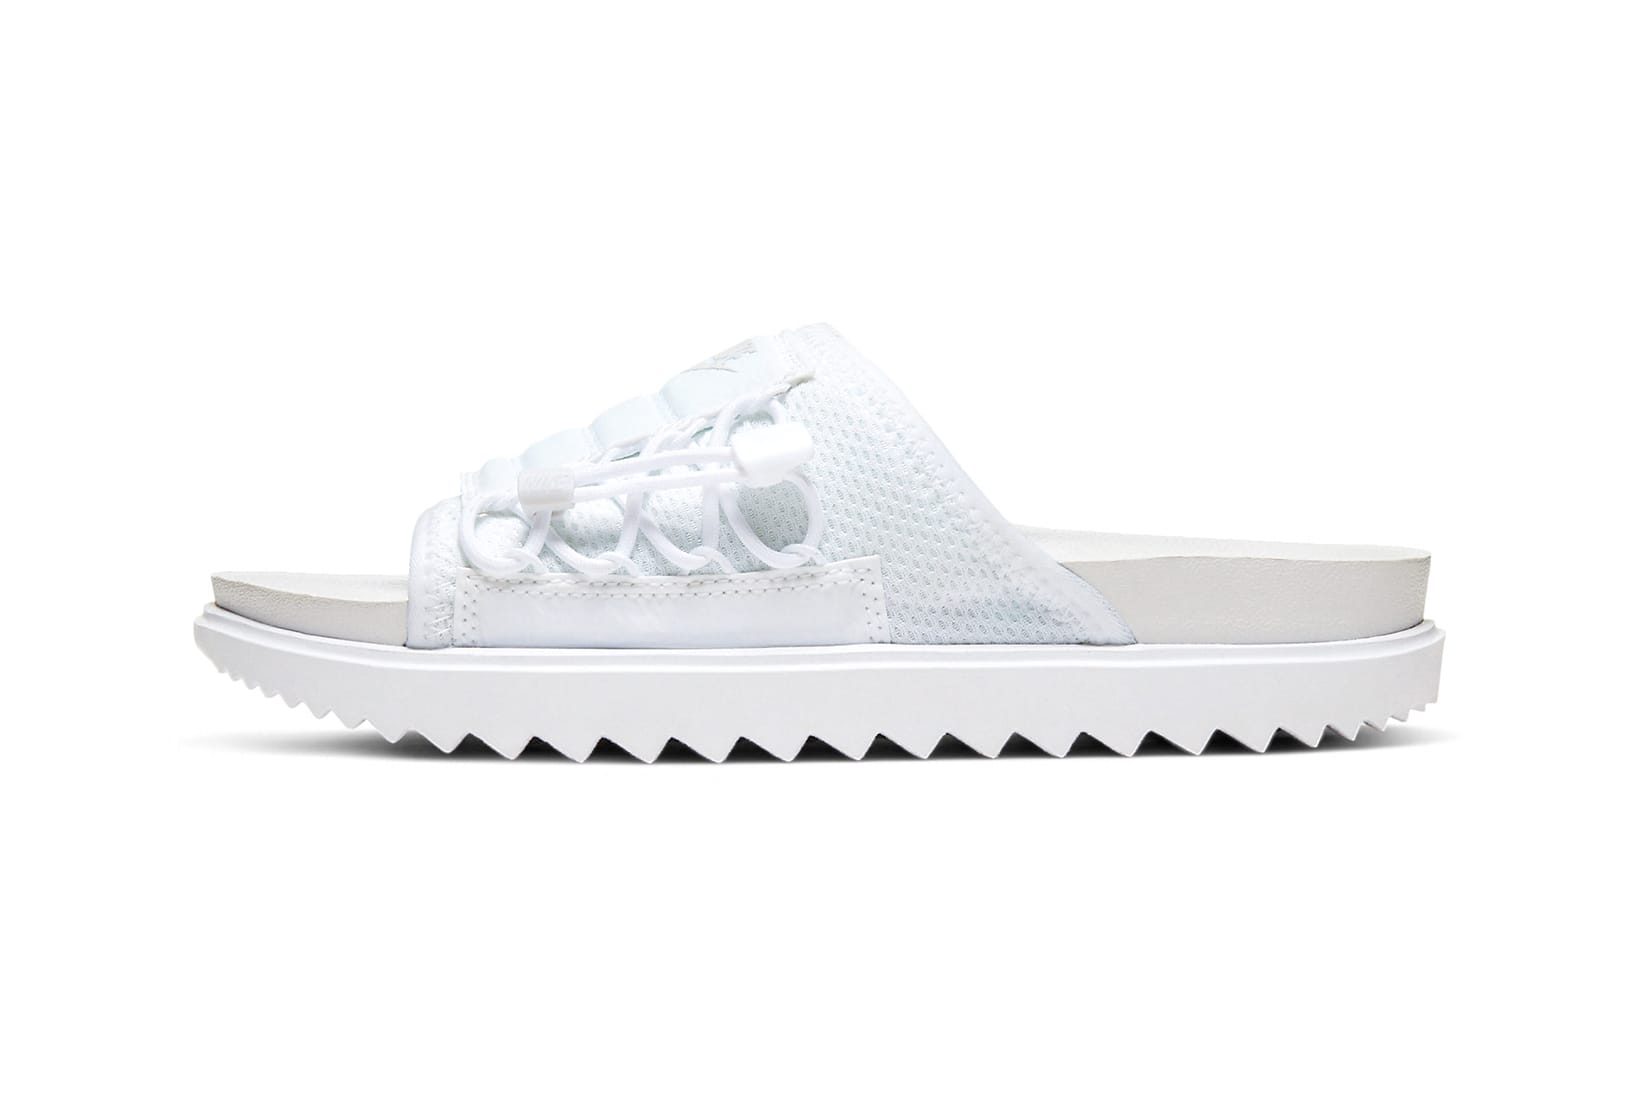 Shop Nike Asuna Slide in White, Lace Up 